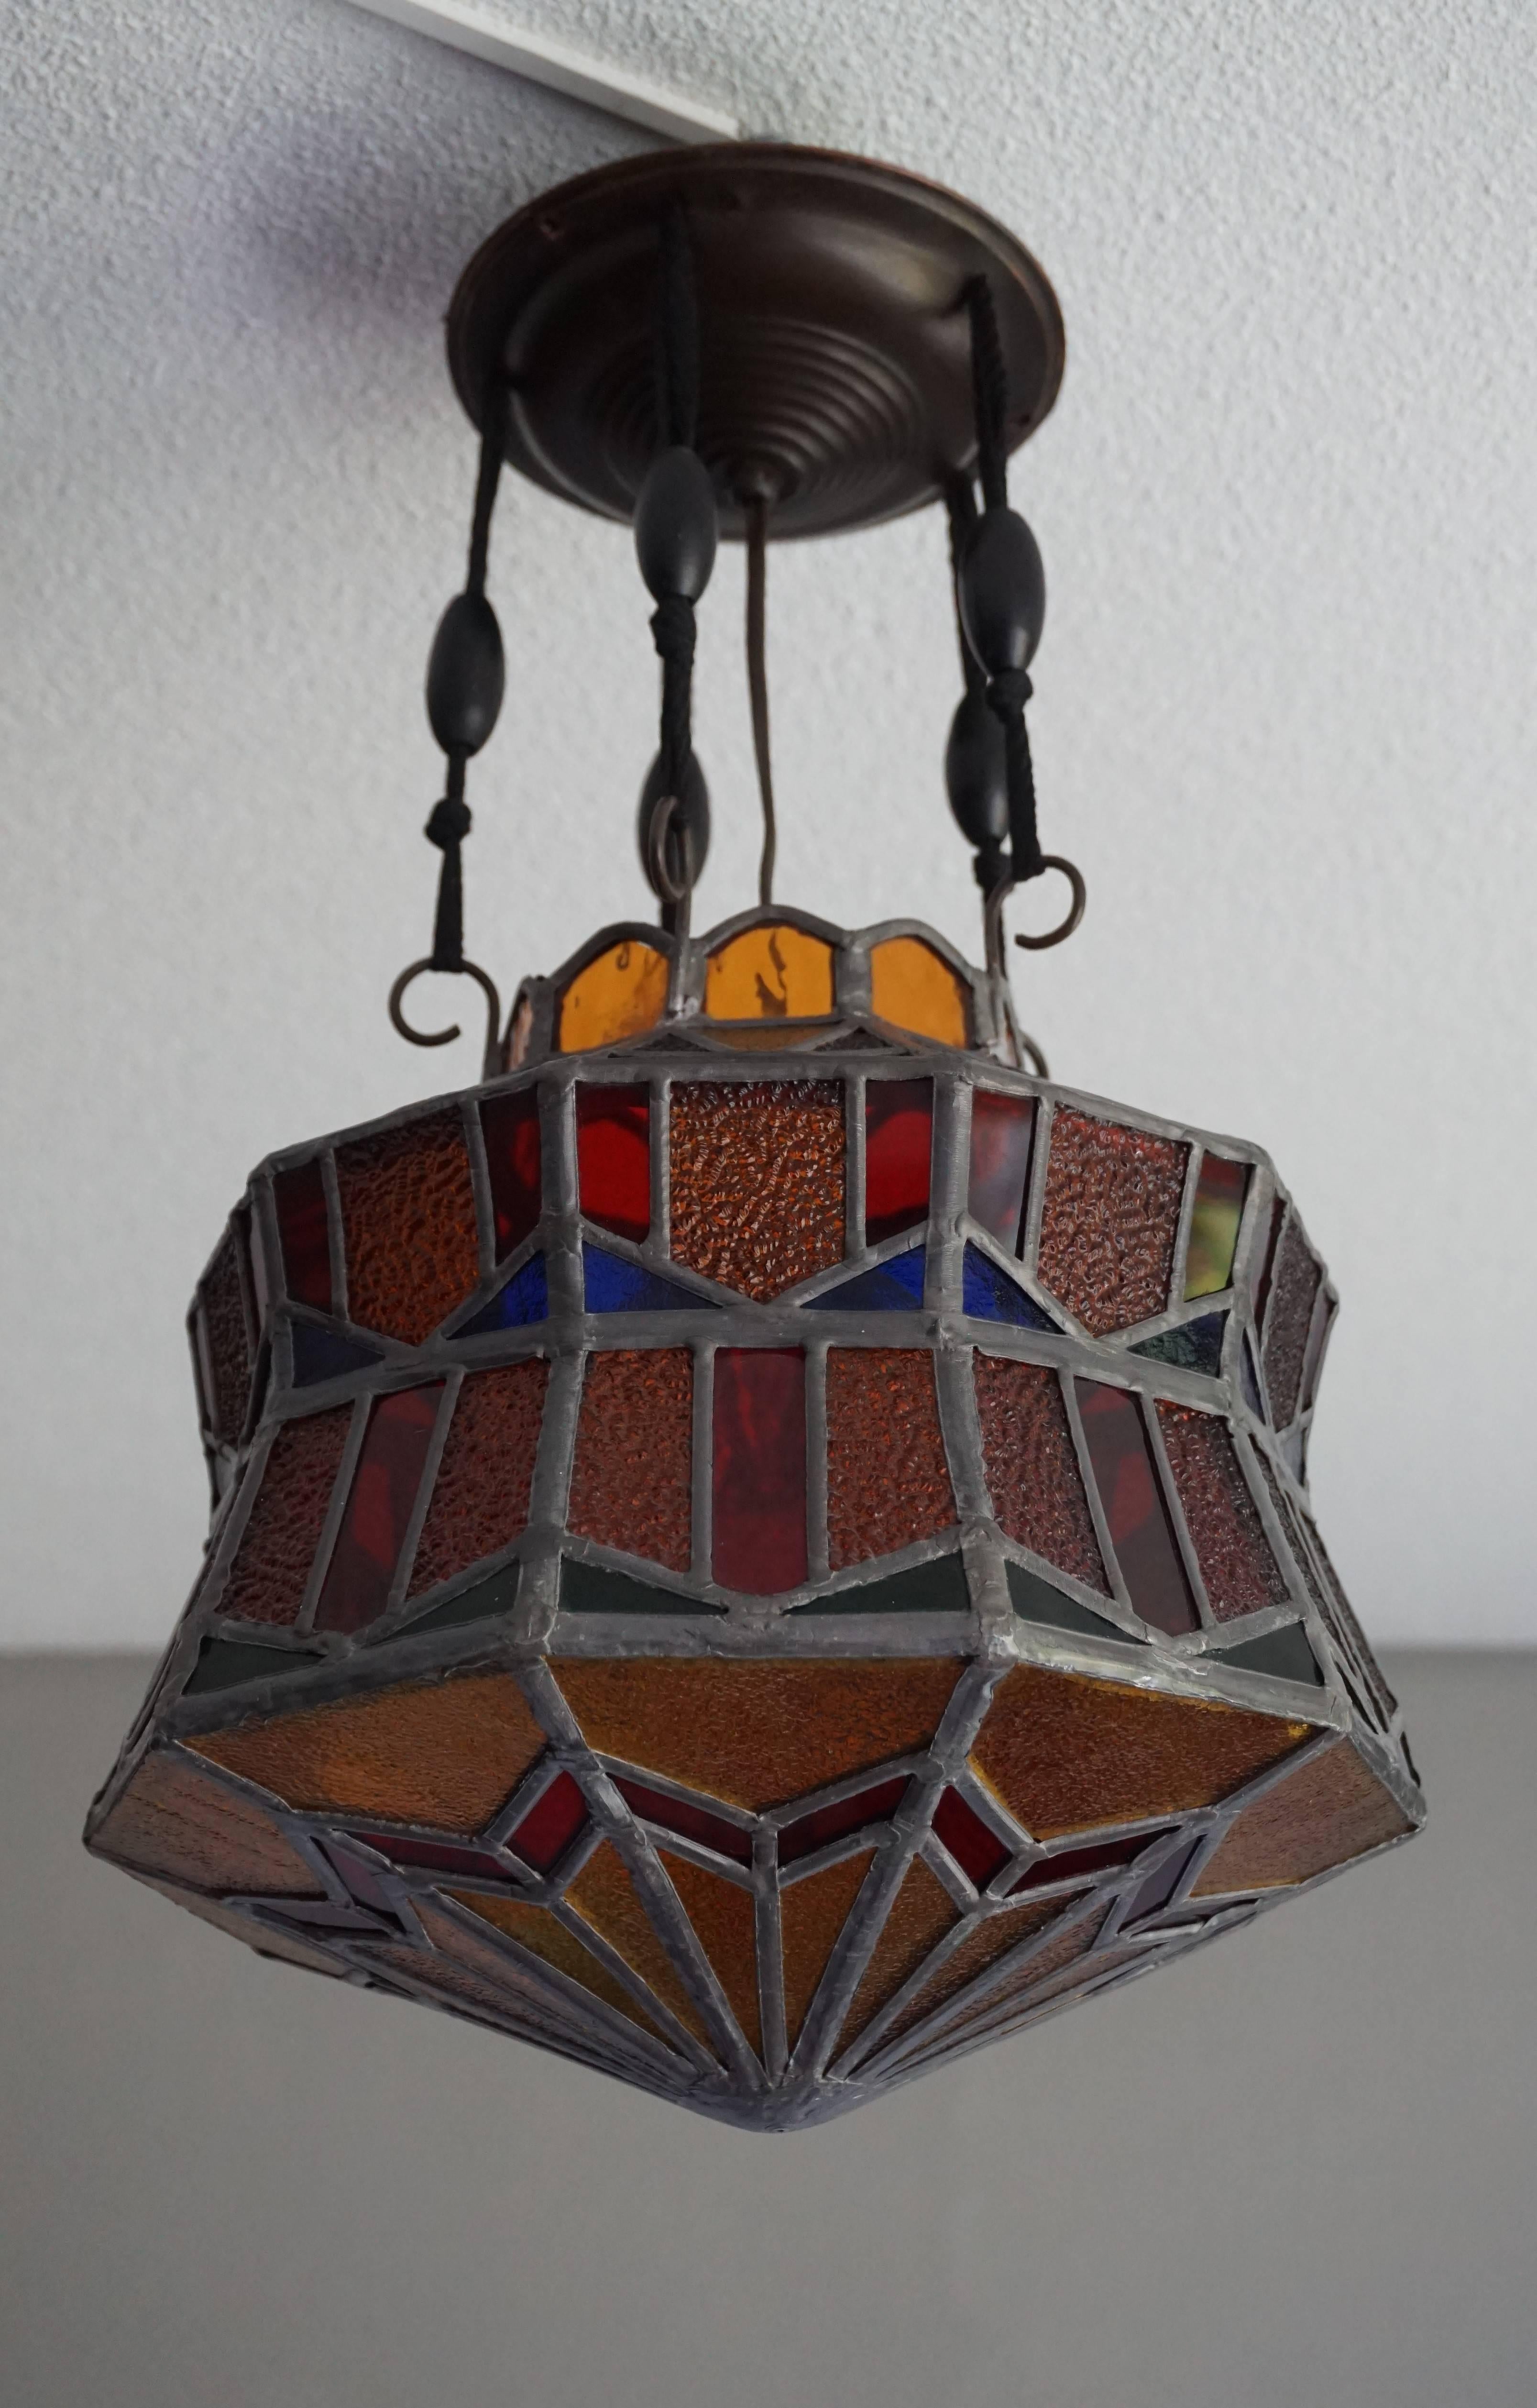 Dutch Handcrafted Stain Leaded Art Deco Glass Pendant Geometric Design & Great Colors